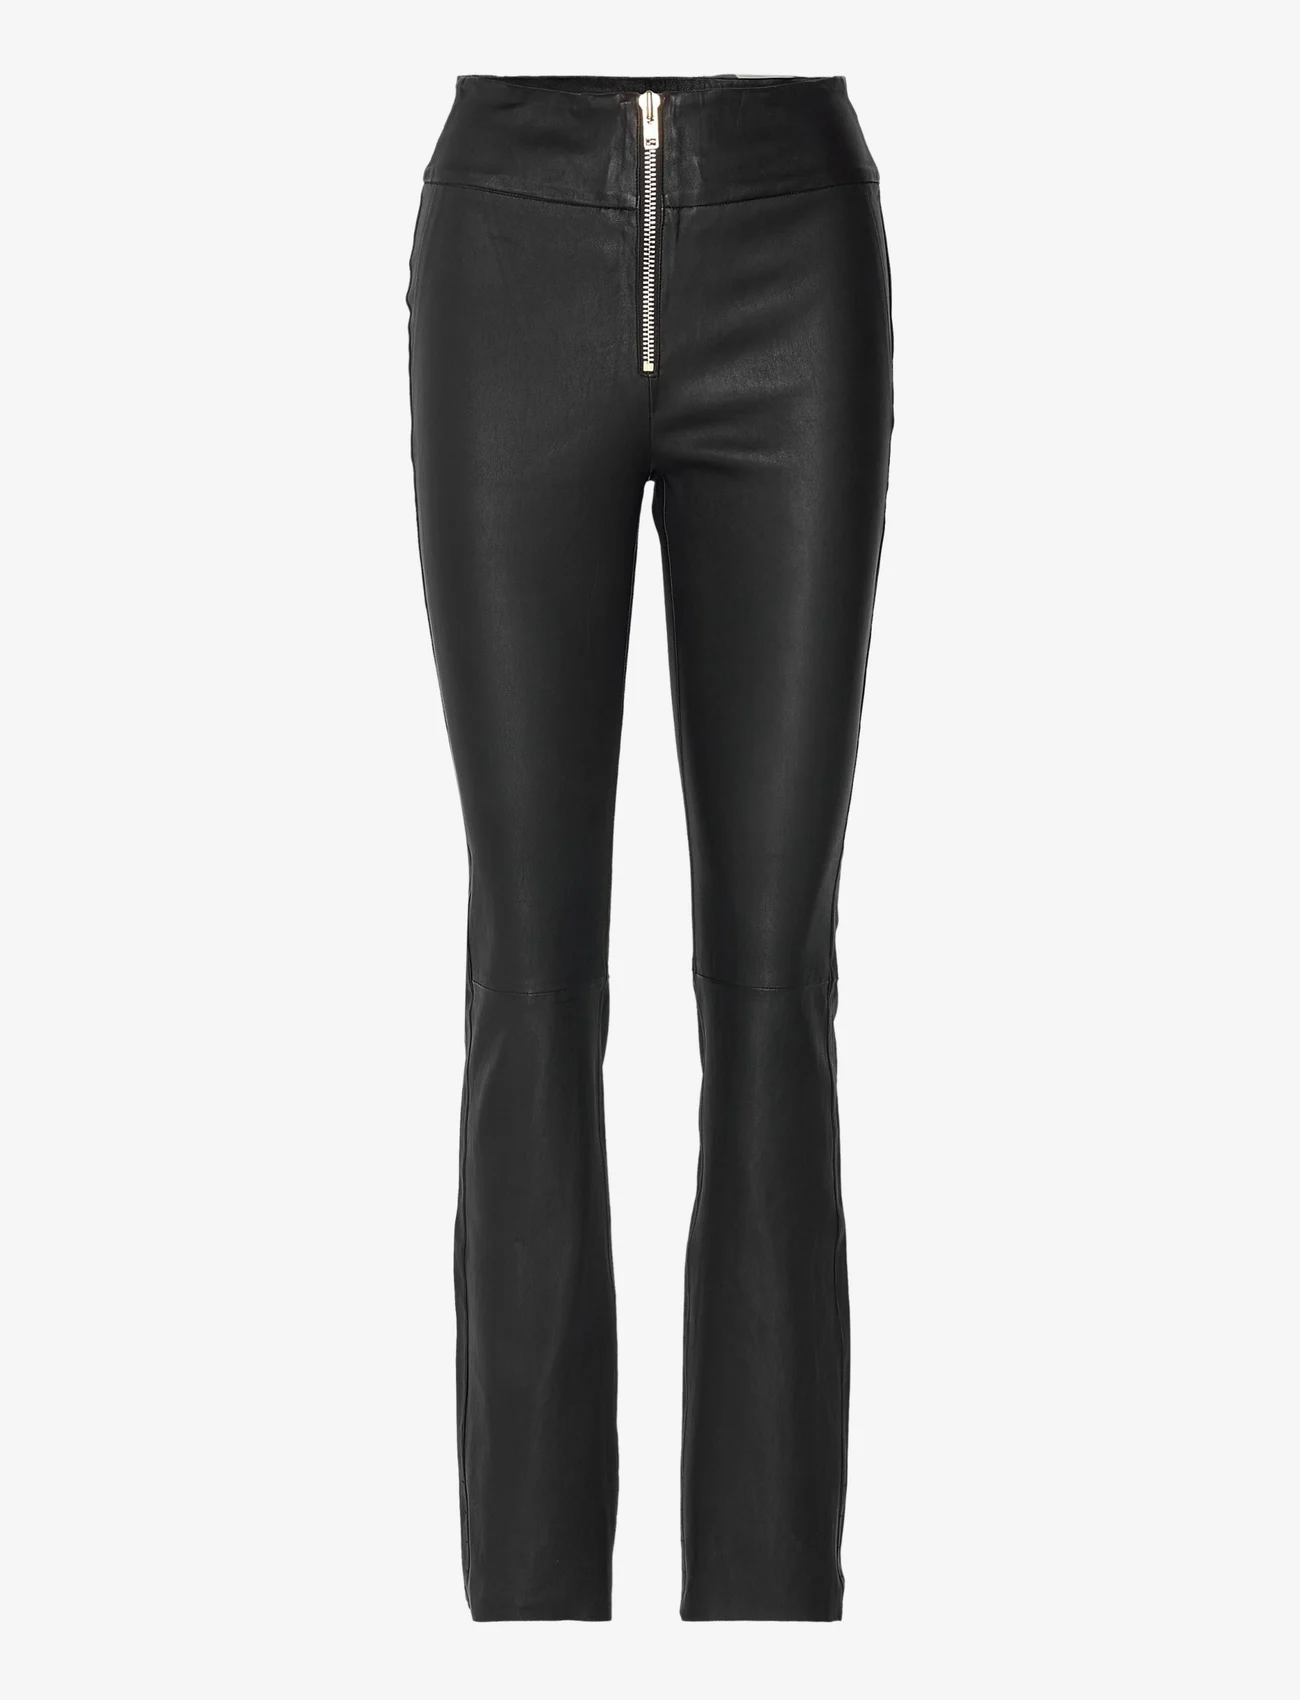 Notes du Nord - Anna Leather Pants - peoriided outlet-hindadega - noir - 0